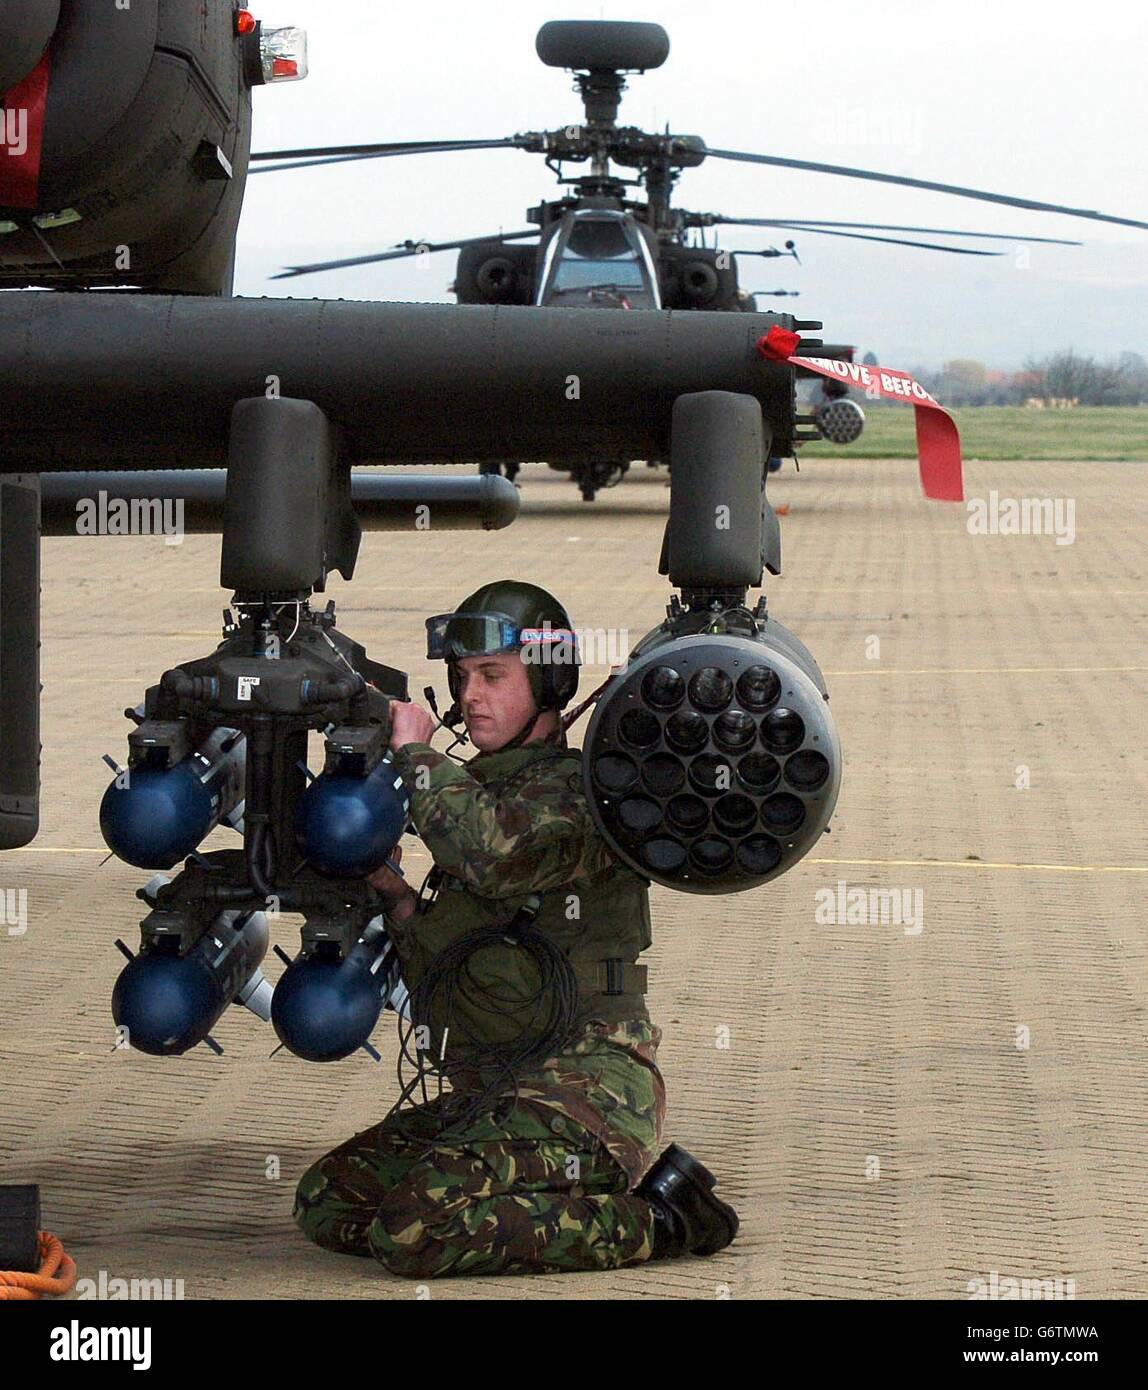 A technician checks the Hellfire missiles on an Apache AH Mk1 helicopter of 9 Regiment Army Air Corps fly, based at Dishforth Airfield near Thirsk. The Army has bought 67 Apaches, which are a UK version of the American attack helicopter which has become a household name through its involvement in a string of recent conflicts; they are based both at Dishforth and with 3 and 4 Regiments Army Air Corps at Wattisham, Suffolk. Stock Photo